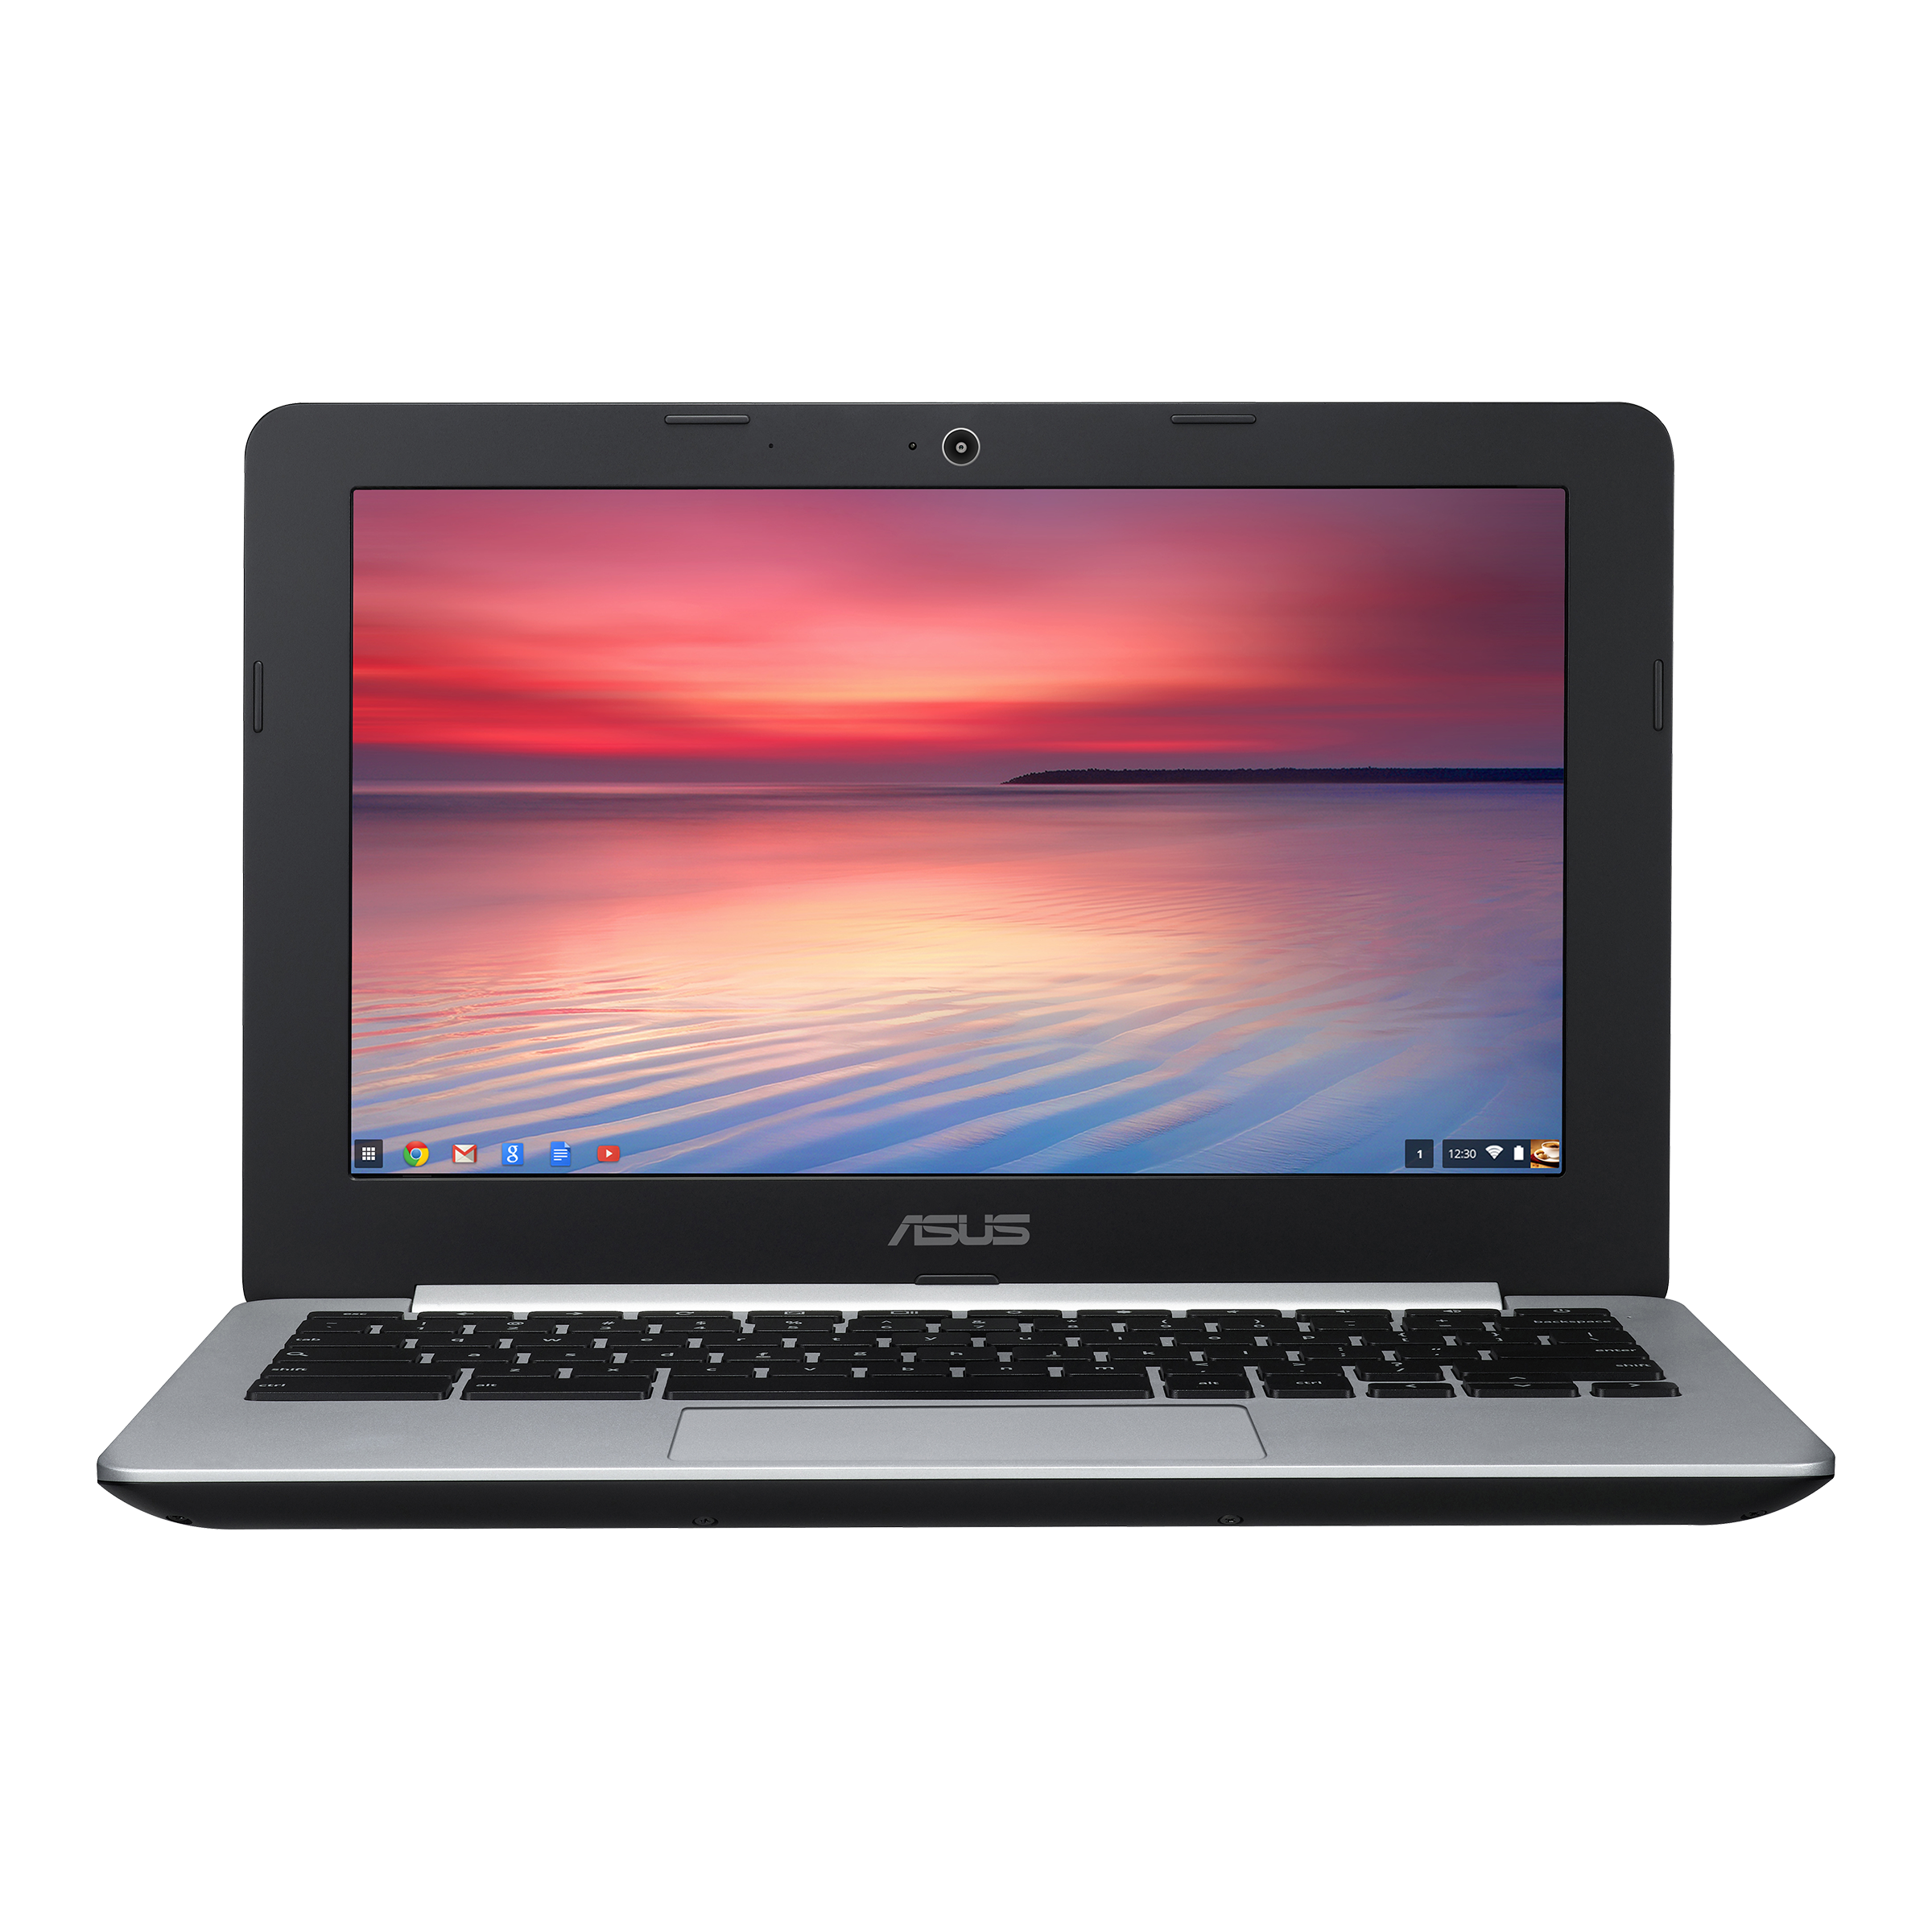 ASUS Chromebook C200 - Tech Specs｜Laptops For Students｜ASUS Global